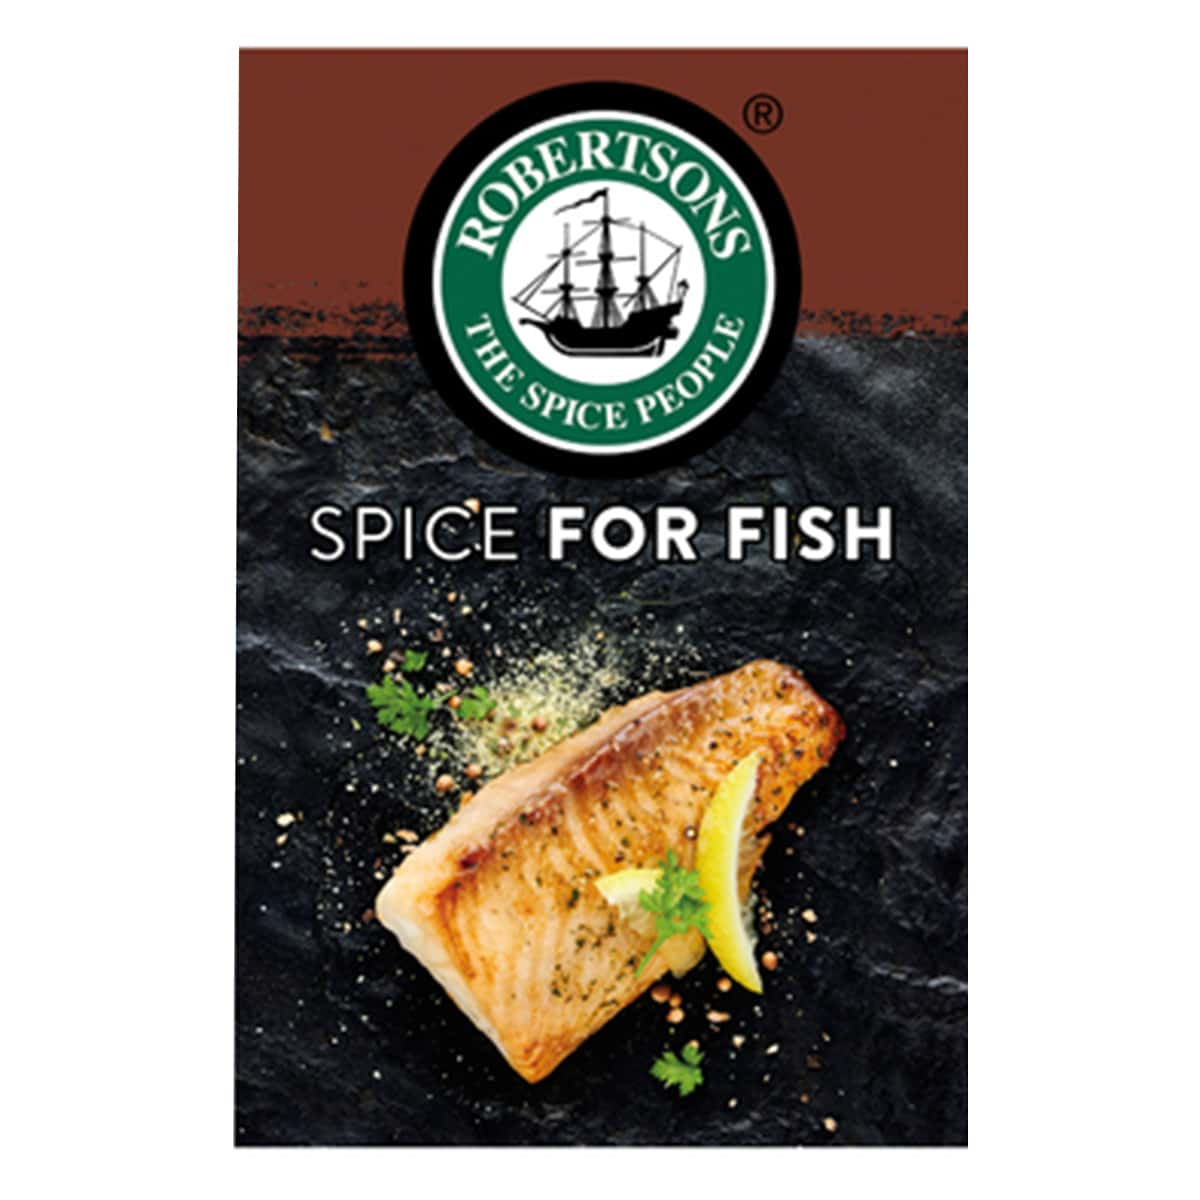 Buy Robertsons Spice for Fish - 80 gm